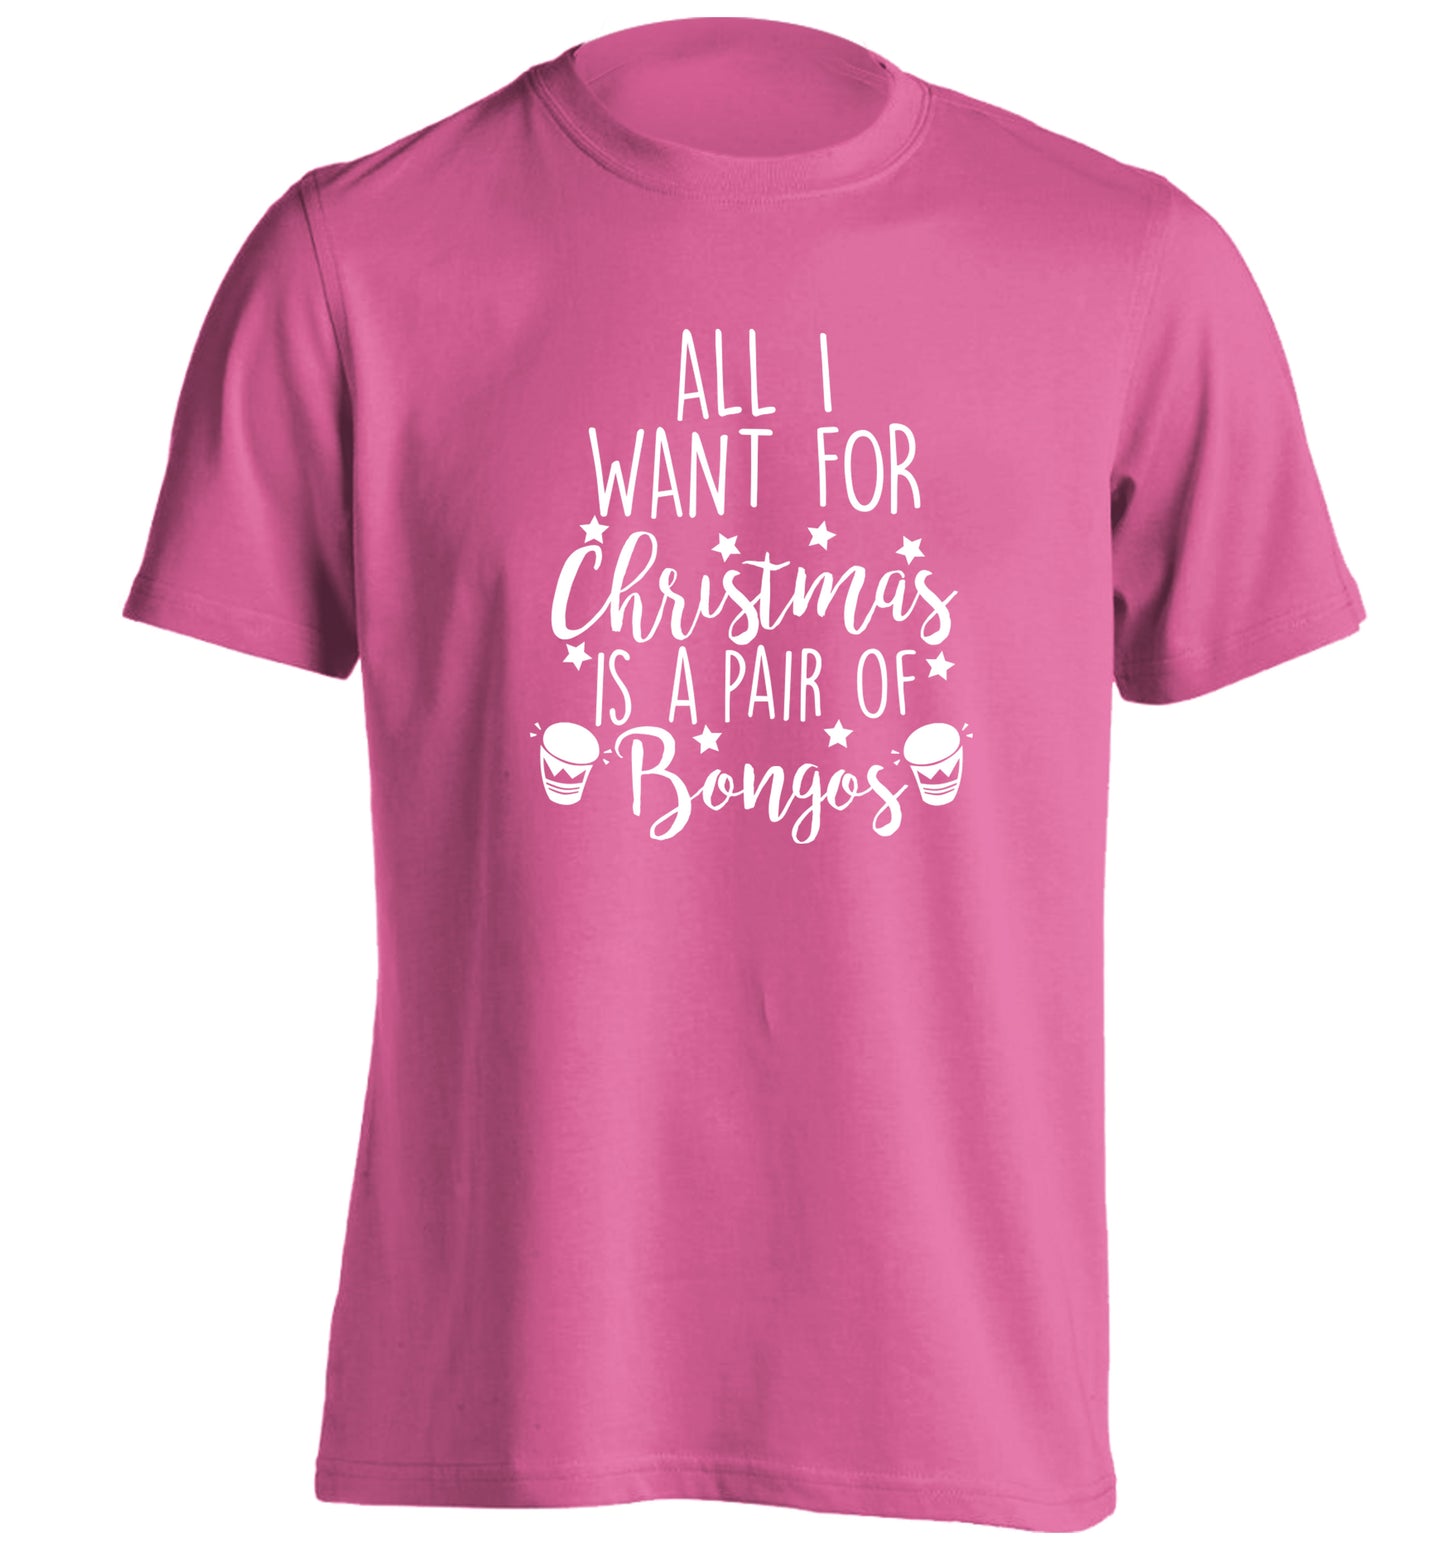 All I want for Christmas is a pair of bongos! adults unisex pink Tshirt 2XL